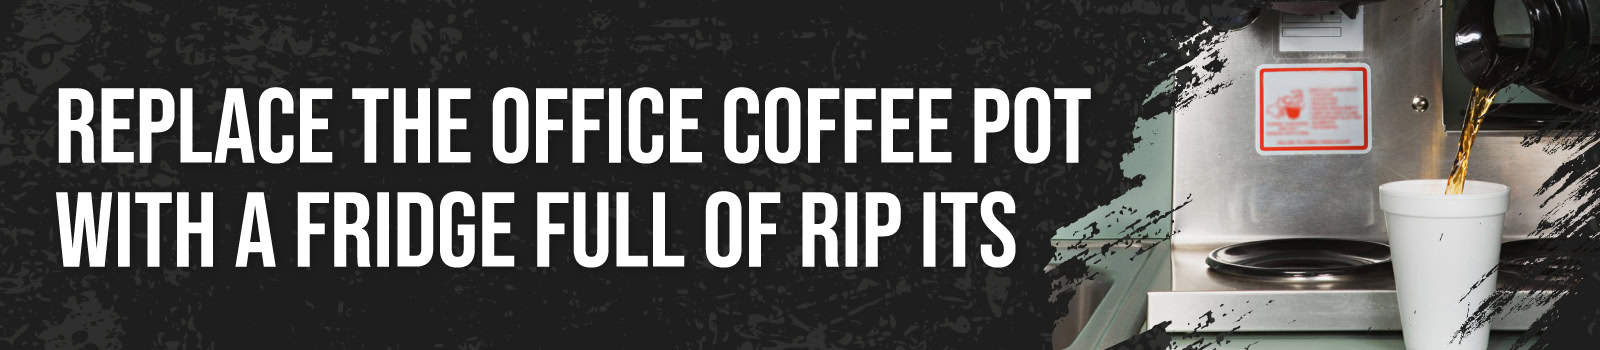 17 Things You Should NOT Do to Celebrate Veterans Day Weekend - #4 Replace the Office Coffee Pot With a Fridge Full of Rip Its